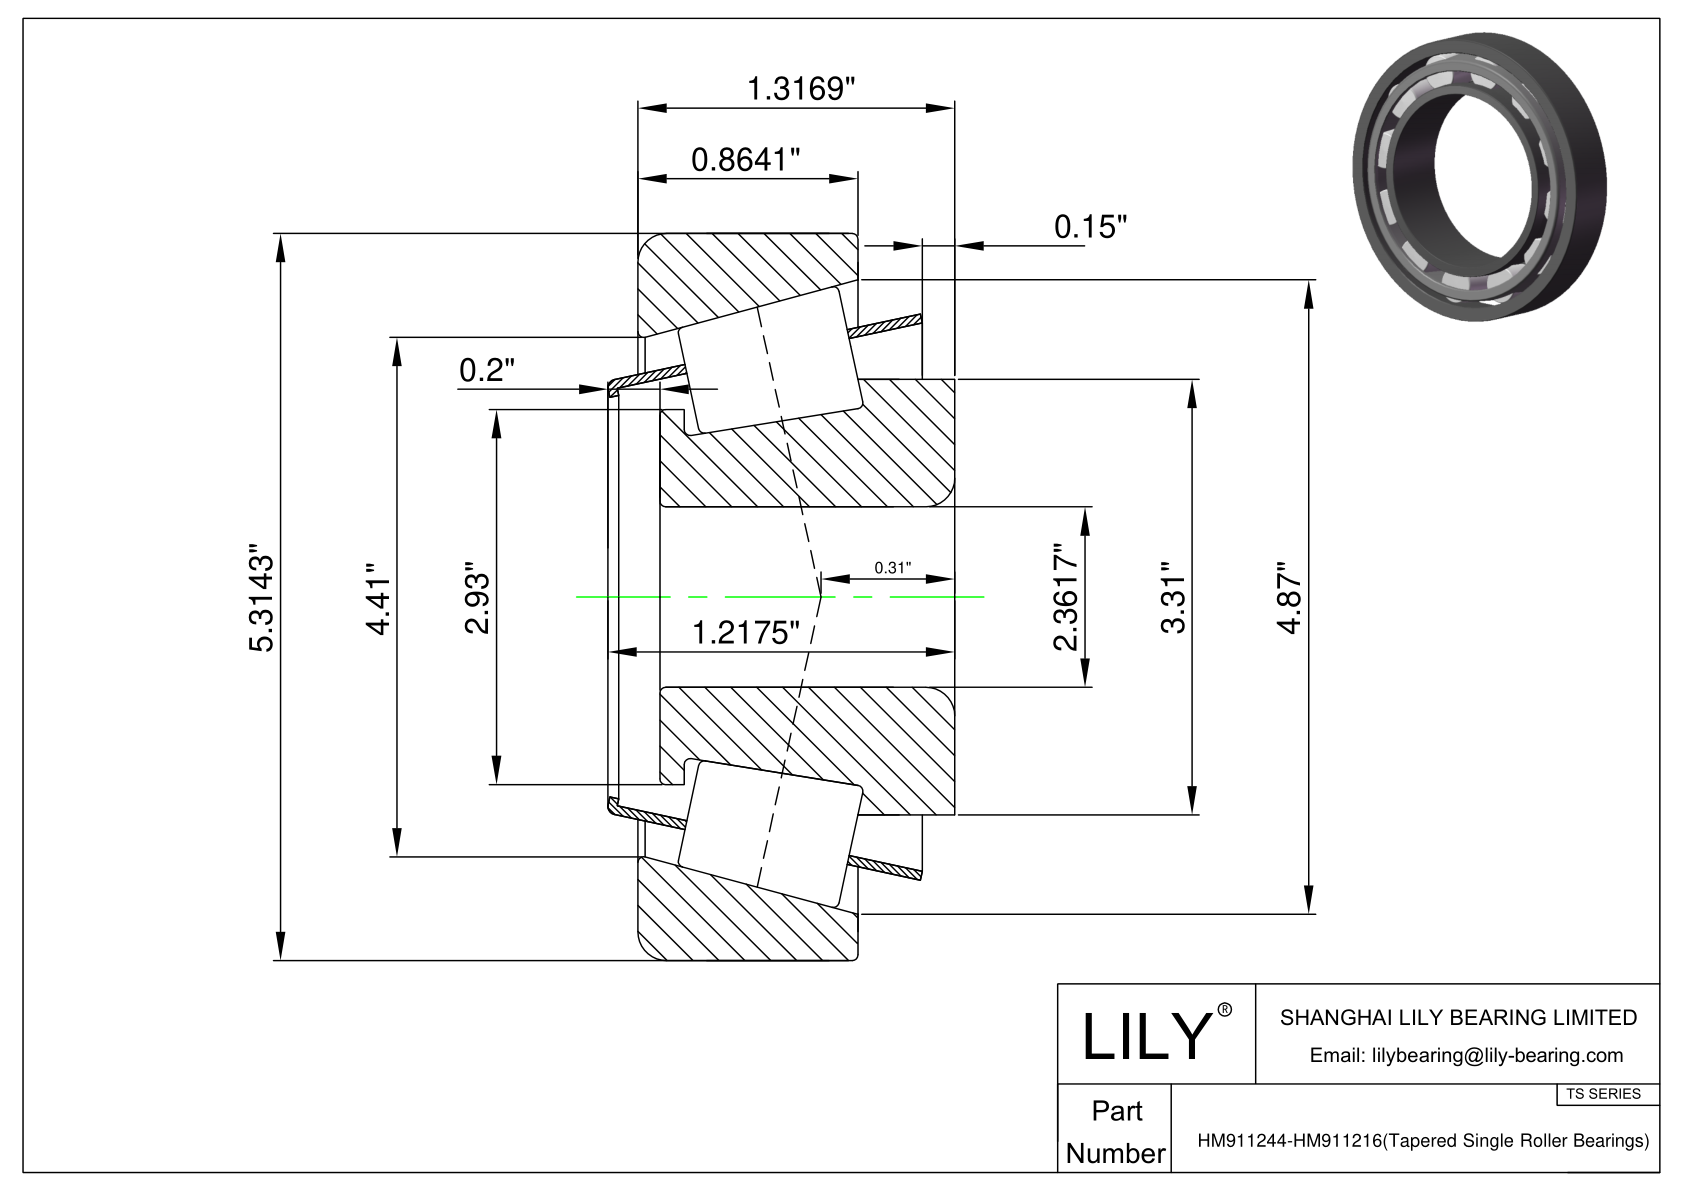 HM911244-HM911216 TS (Tapered Single Roller Bearings) (Imperial) cad drawing